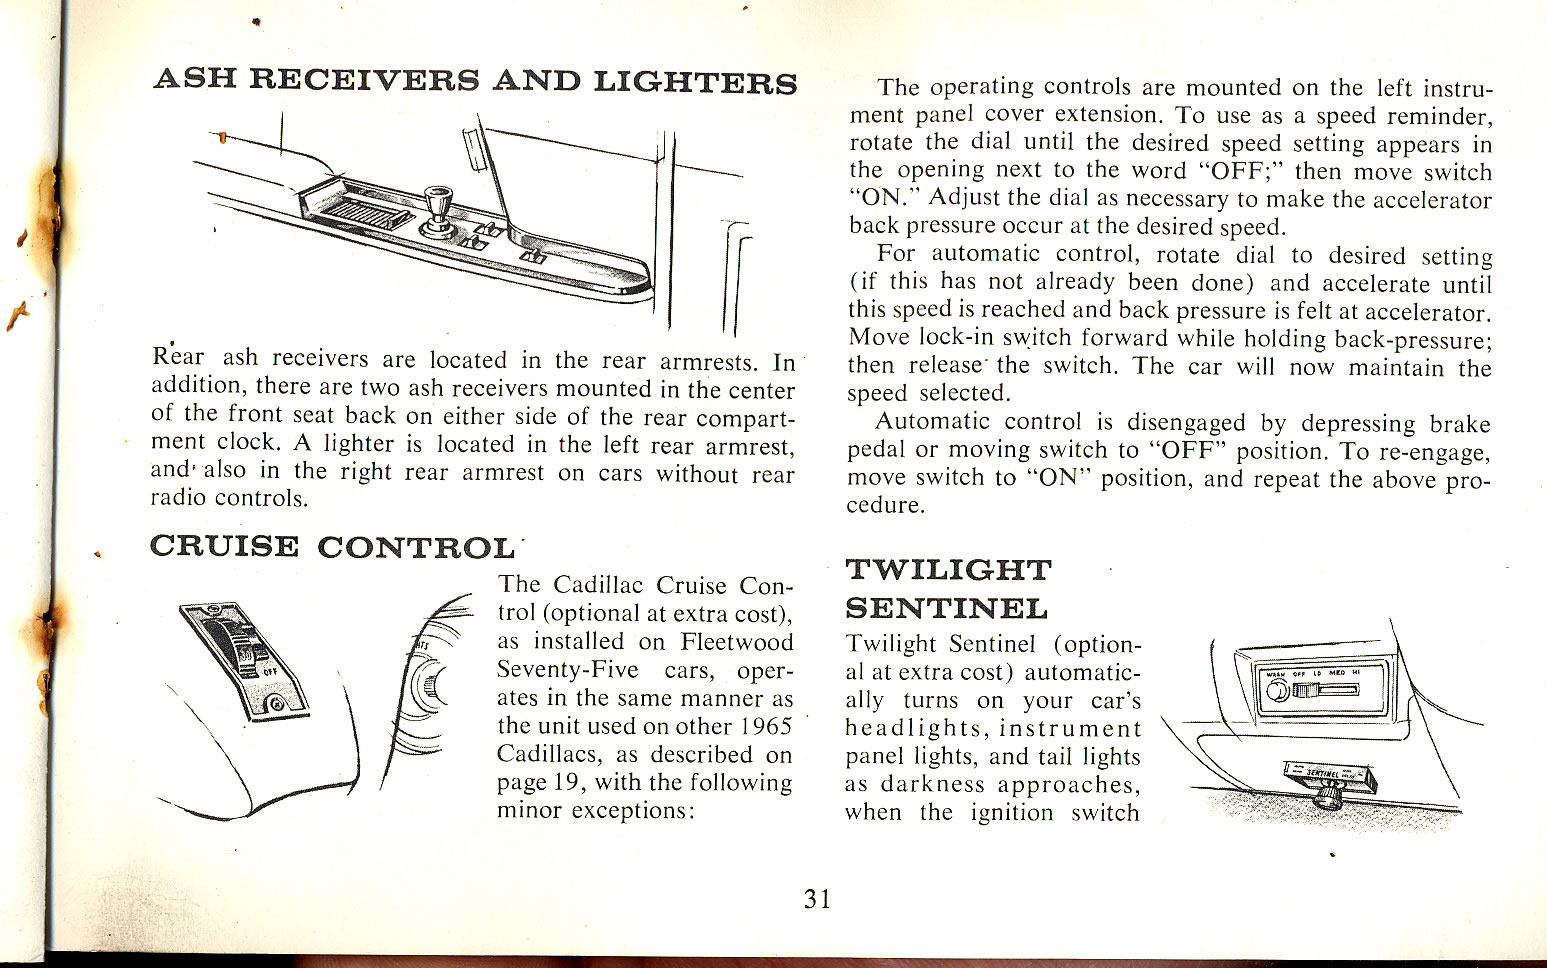 1965 Cadillac Owners Manual Page 14